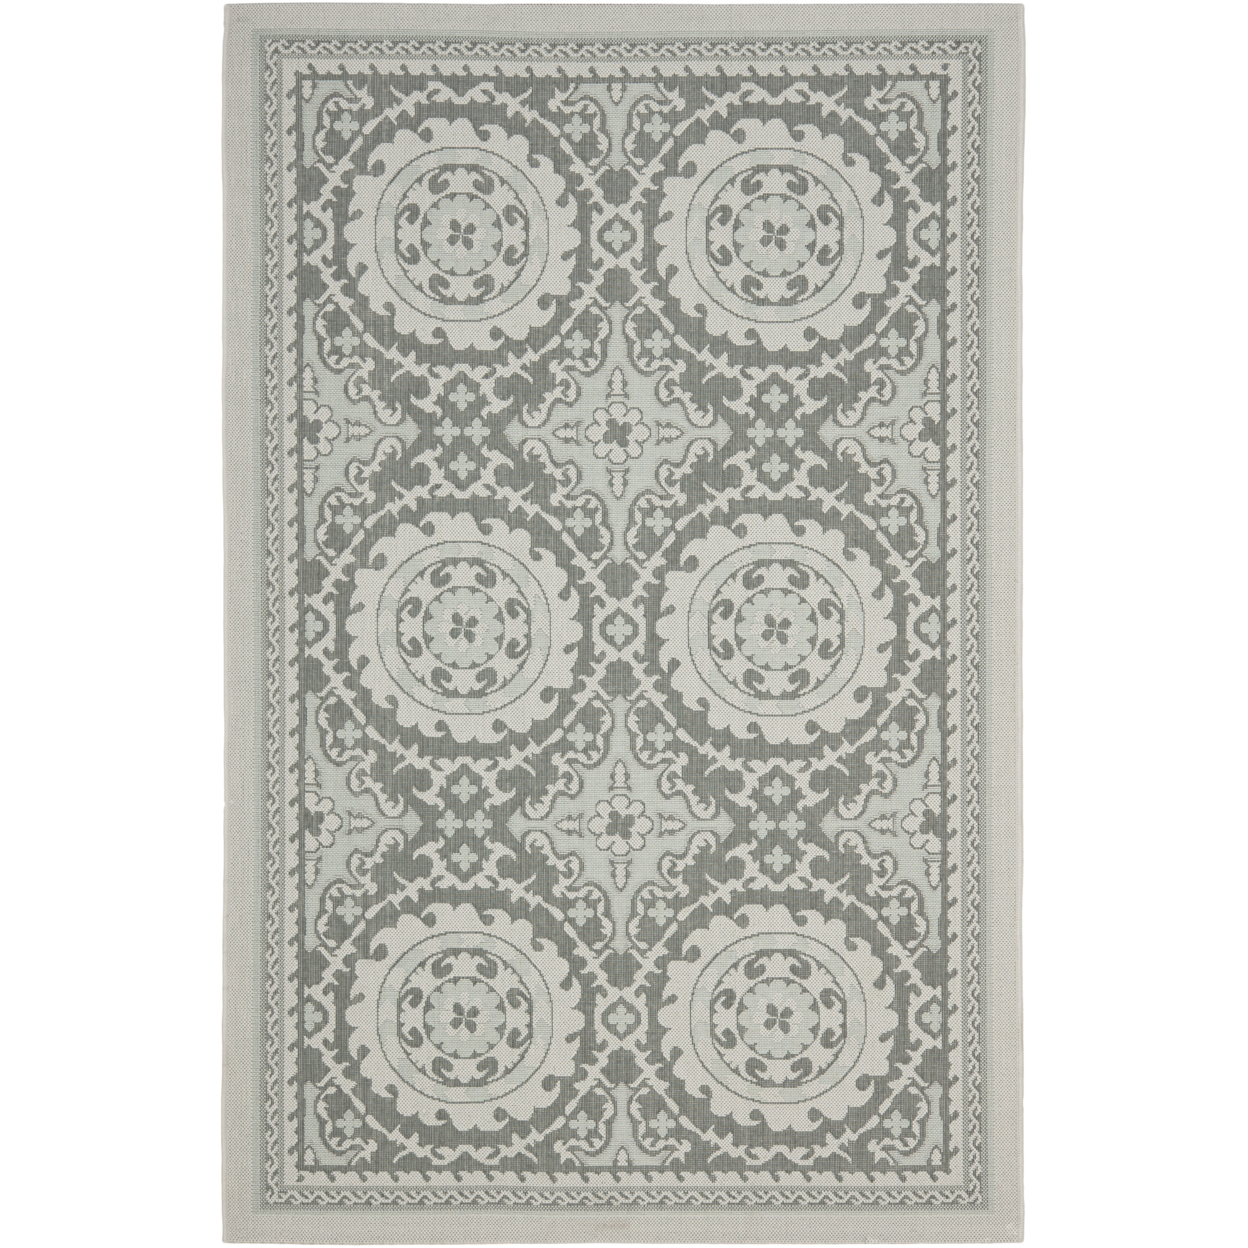 SAFAVIEH Outdoor CY7059-78A18 Courtyard Lt Grey / Anthracite Rug - 4' X 5' 7